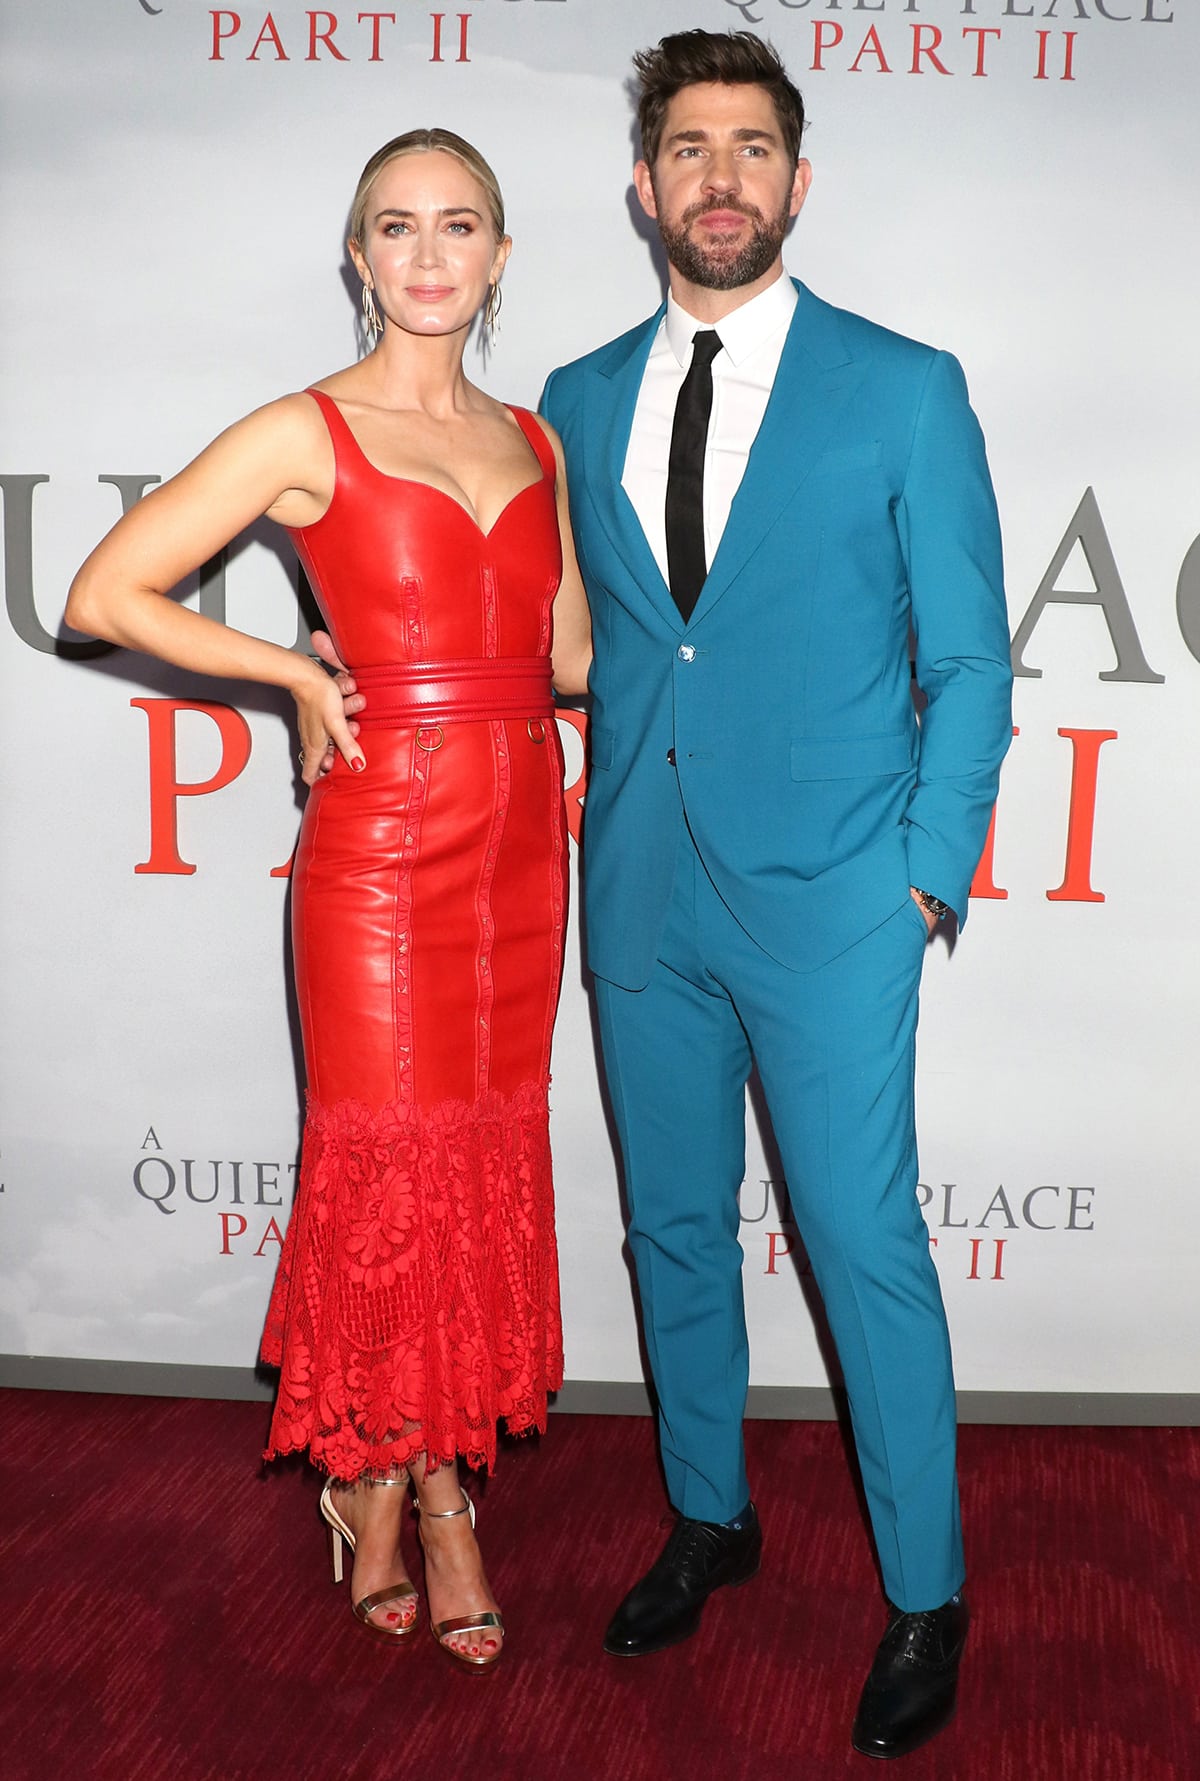 Emily Blunt with husband John Krasinski at the premiere of A Quiet Place Part II in New York City on March 8, 2020